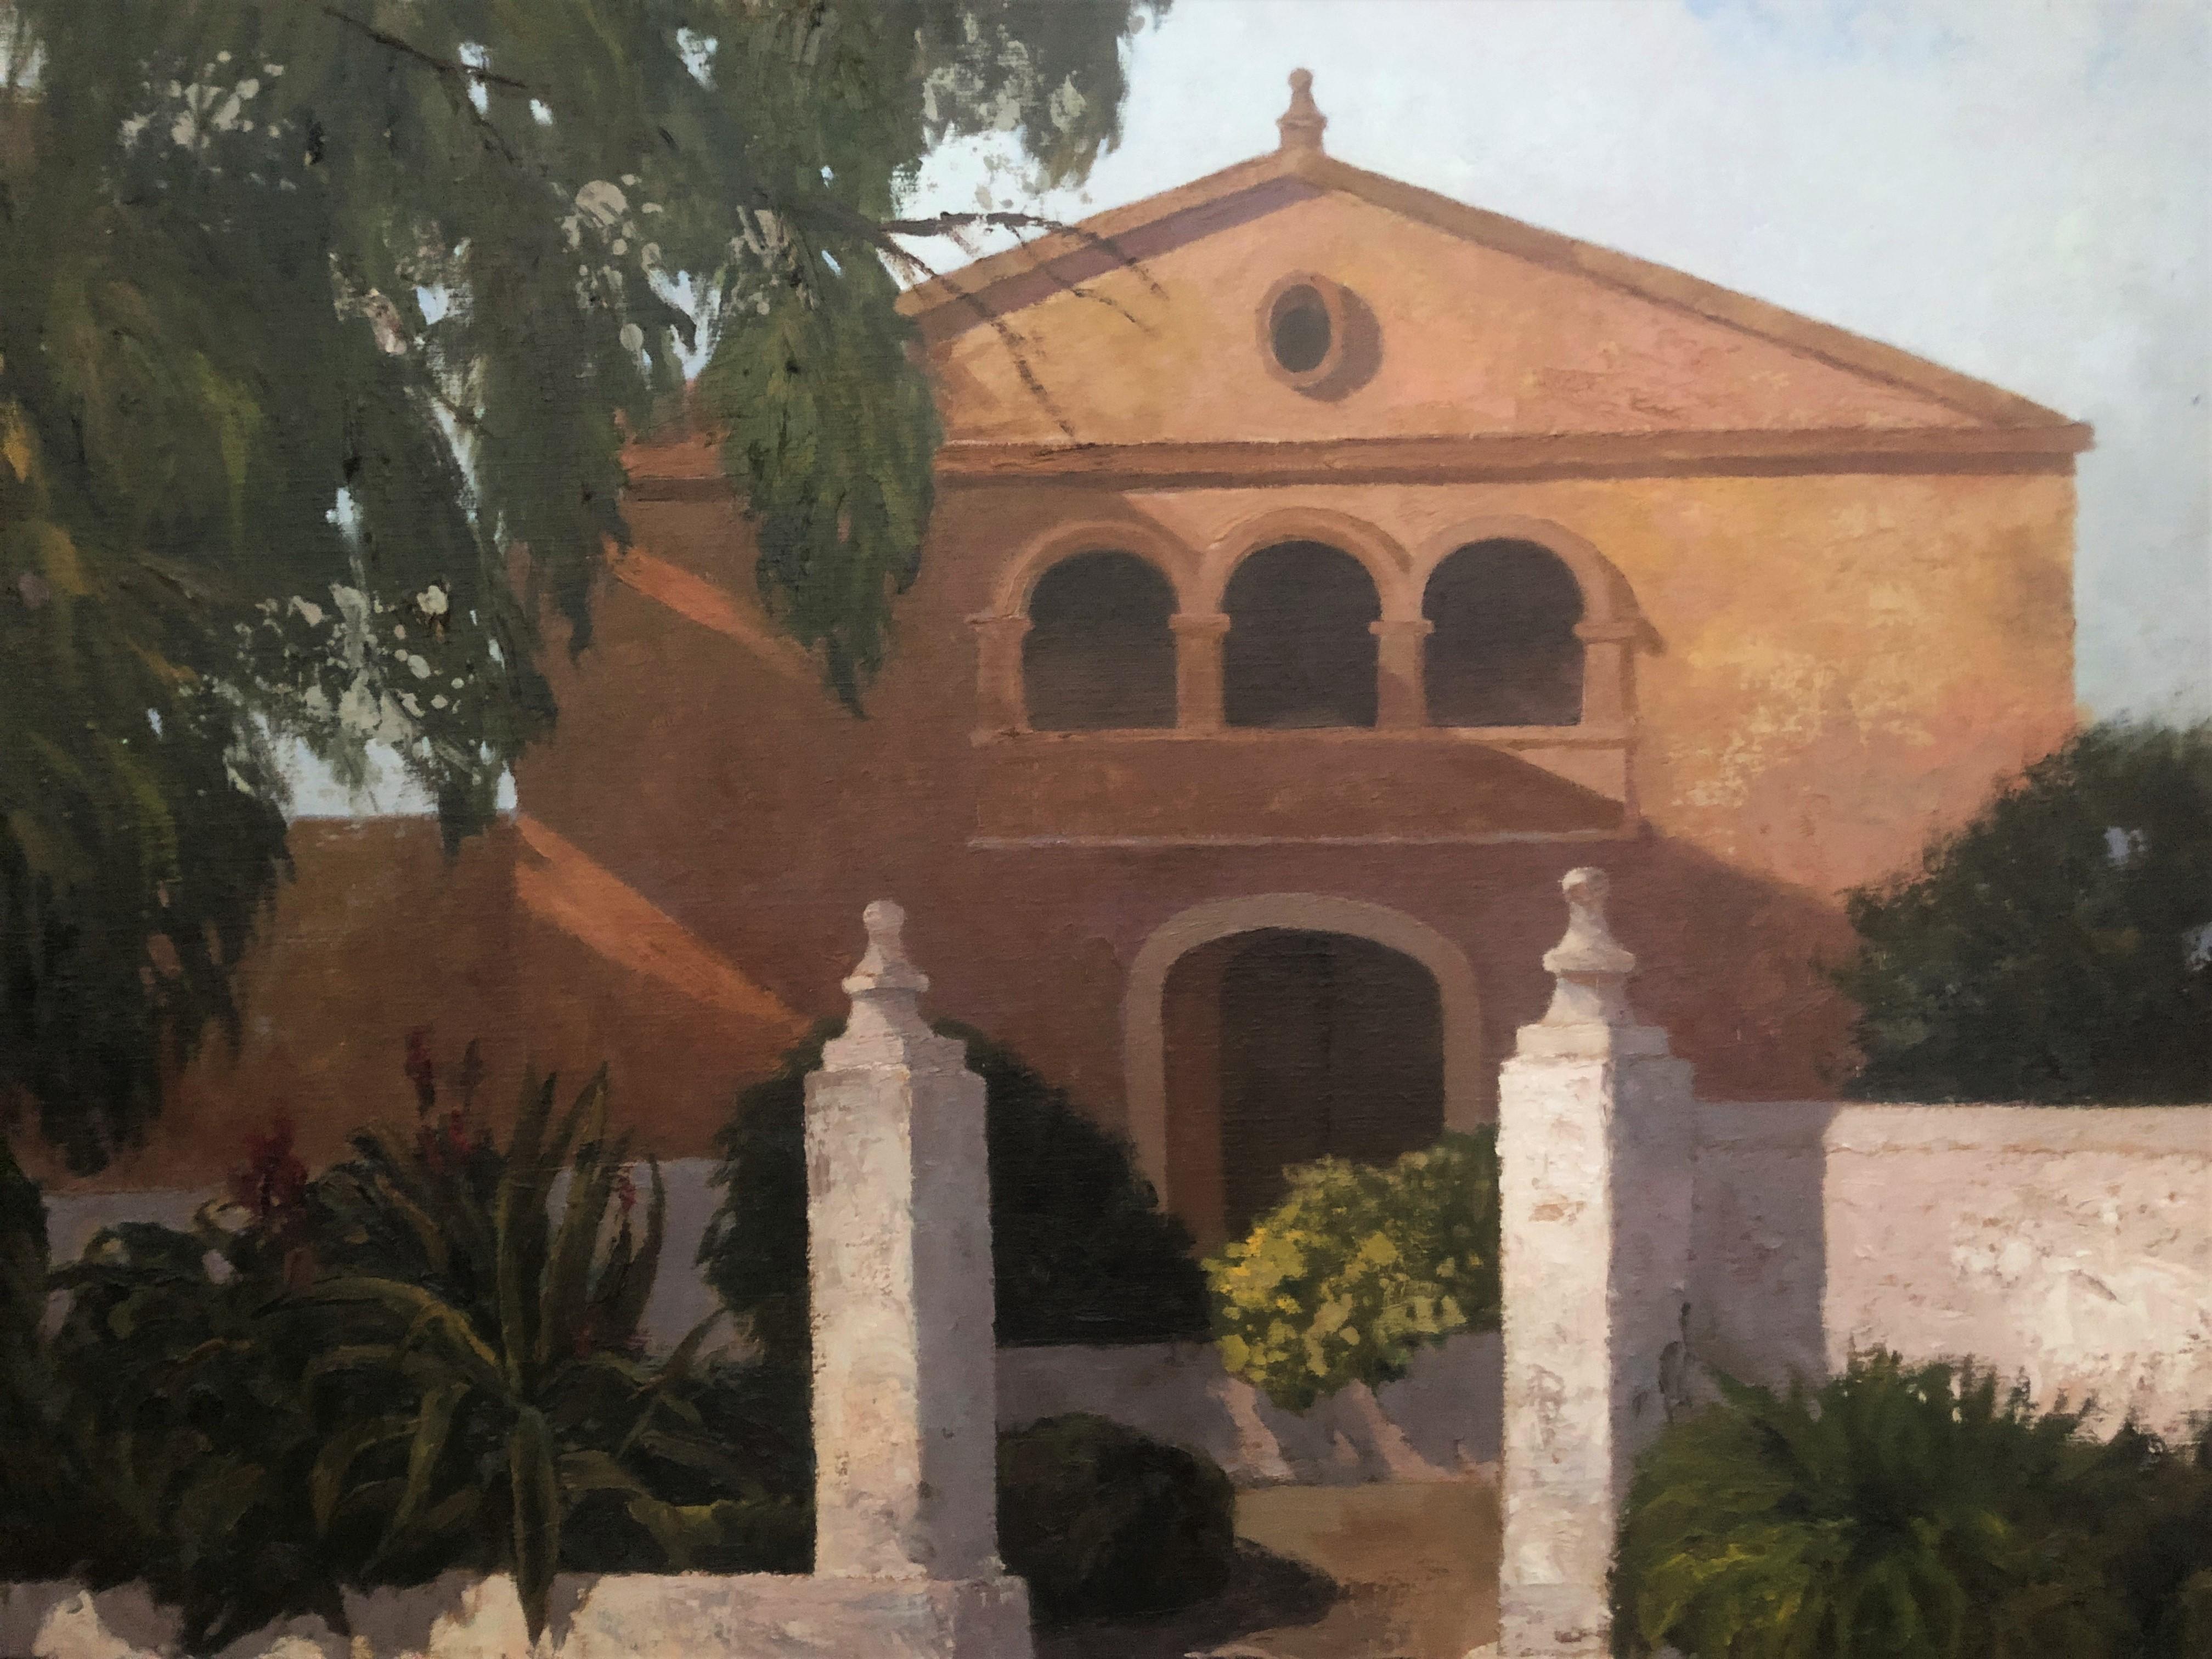 Frame size 89x105 cm.

Poch Romeu was one of the most relevant and renowned landscape painters who originated in the second half of the 20th century. His technique was oil on canvas and the artist's favorite subjects were those of the island of